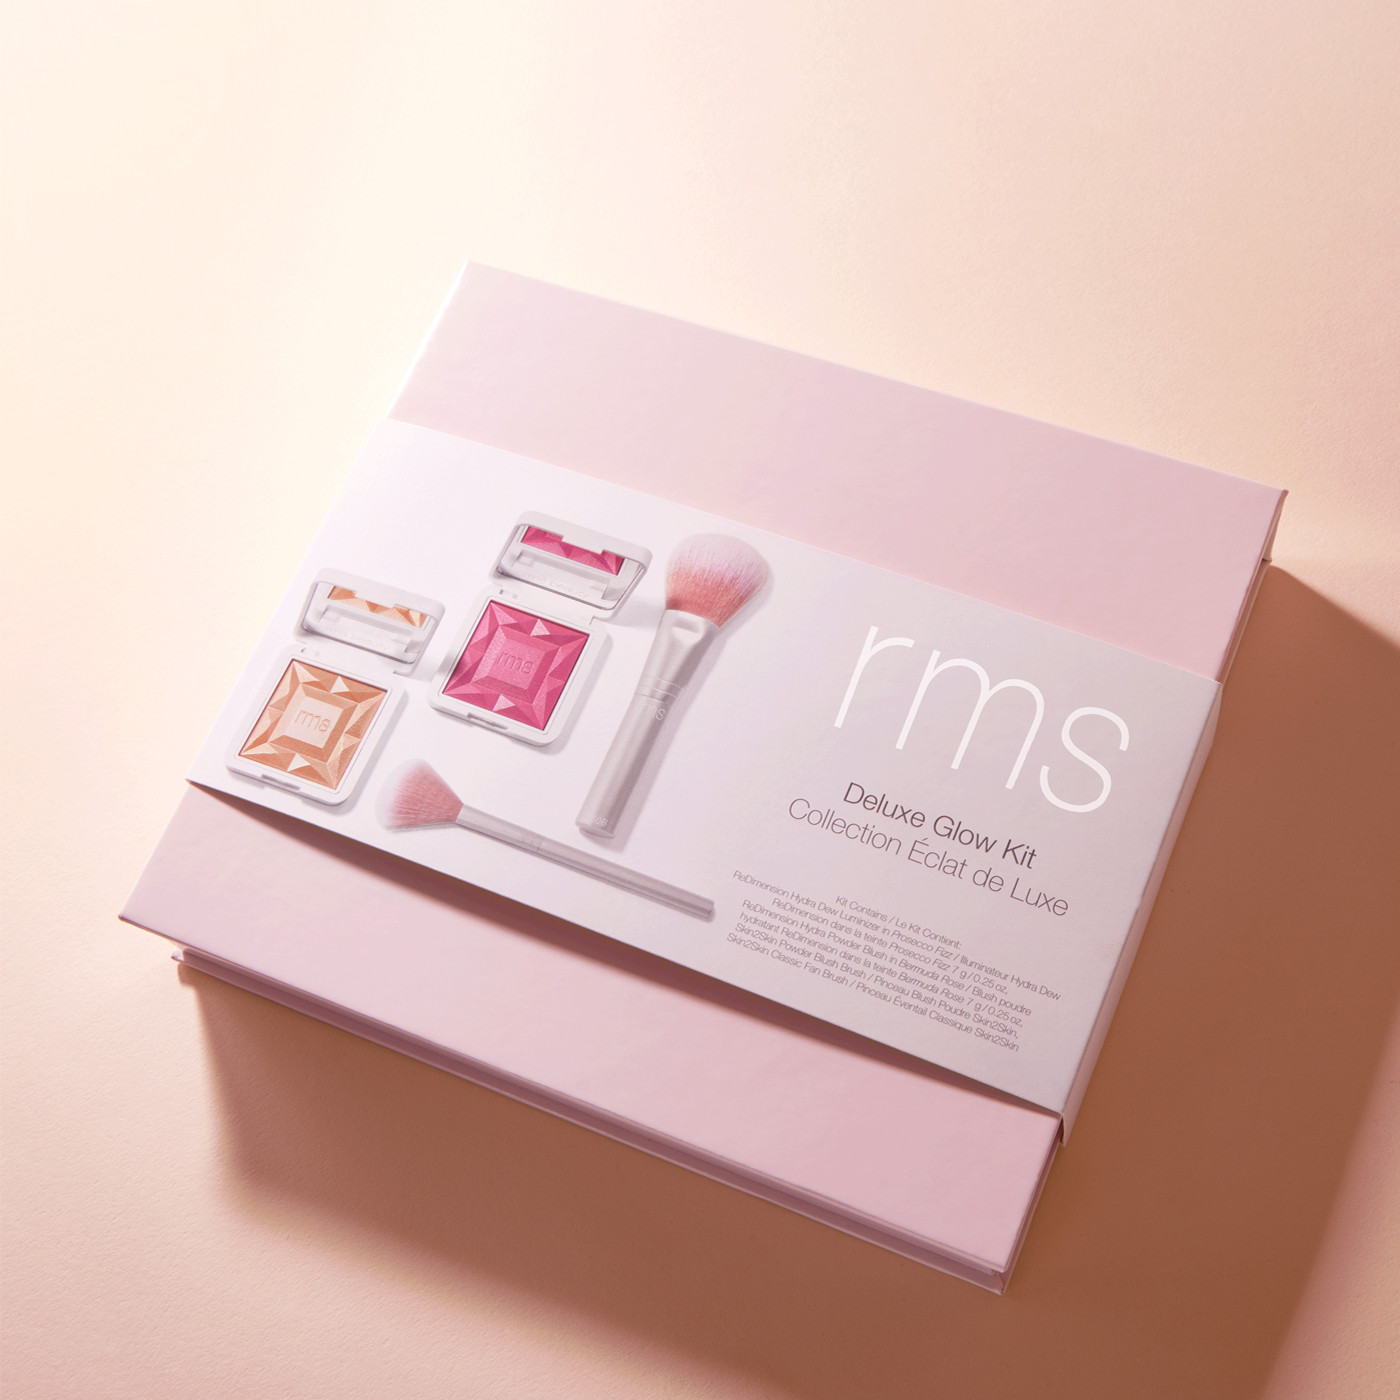 RMS Beauty - Collection Eclat - Deluxe Glow Kit